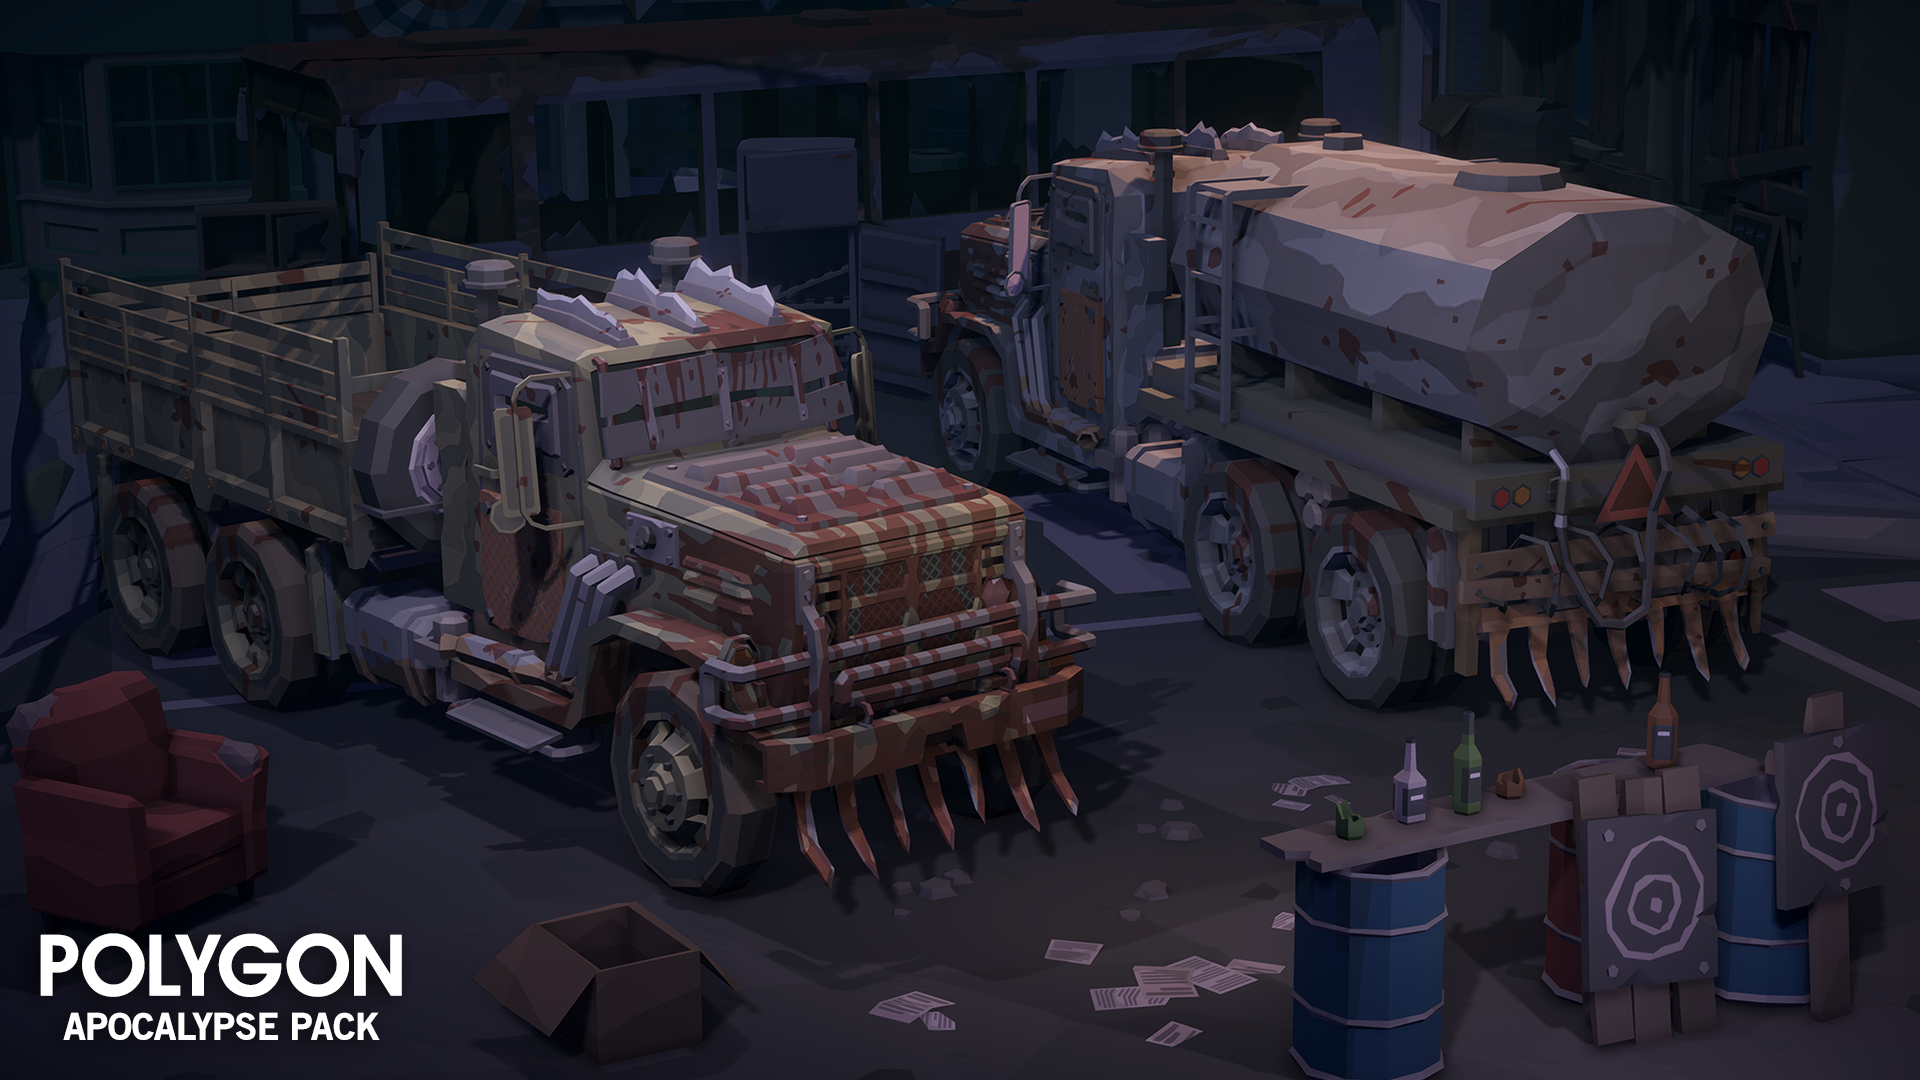 Apocalypse Pack 3D low poly transportation vehicle assets for game development